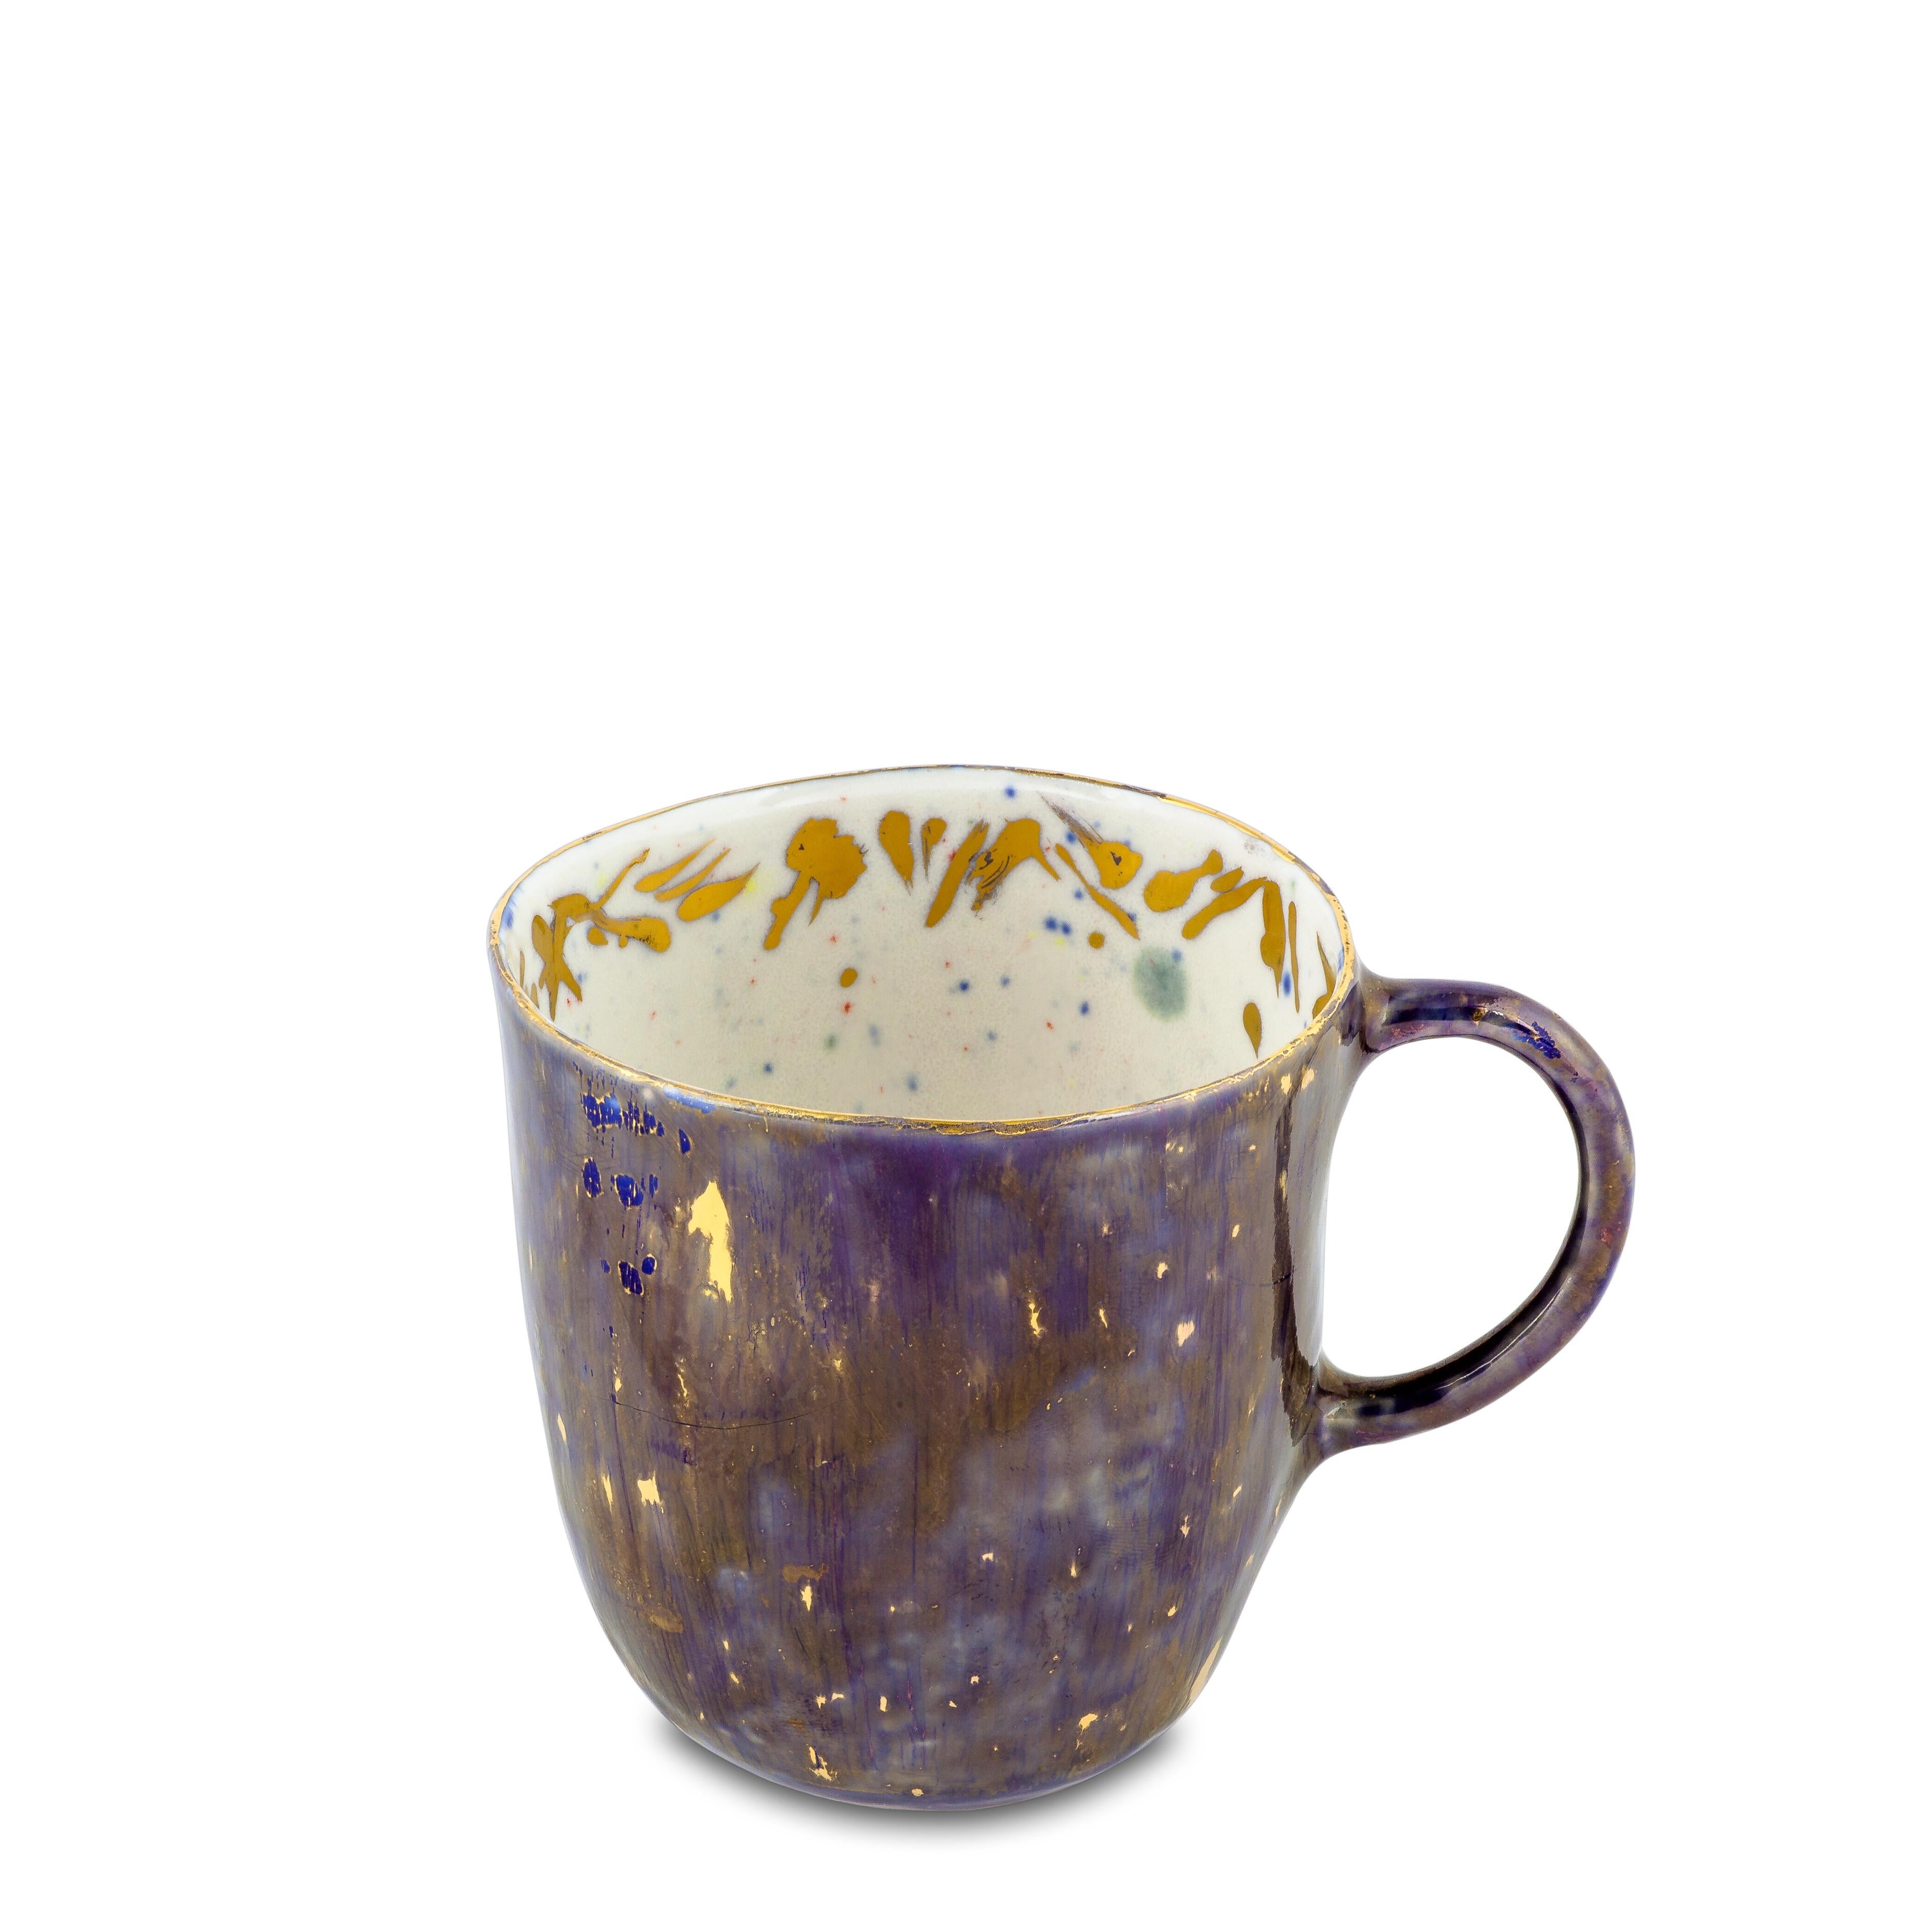 Handcrafted in Italy from the finest porcelain, Coralla's mugs are of her own design and a symbol of her work. Outside, this Apollo Bianco Coralla's Mug has a deep blue décor enriched by golden nuggets, like a starry night; the inside is painted in